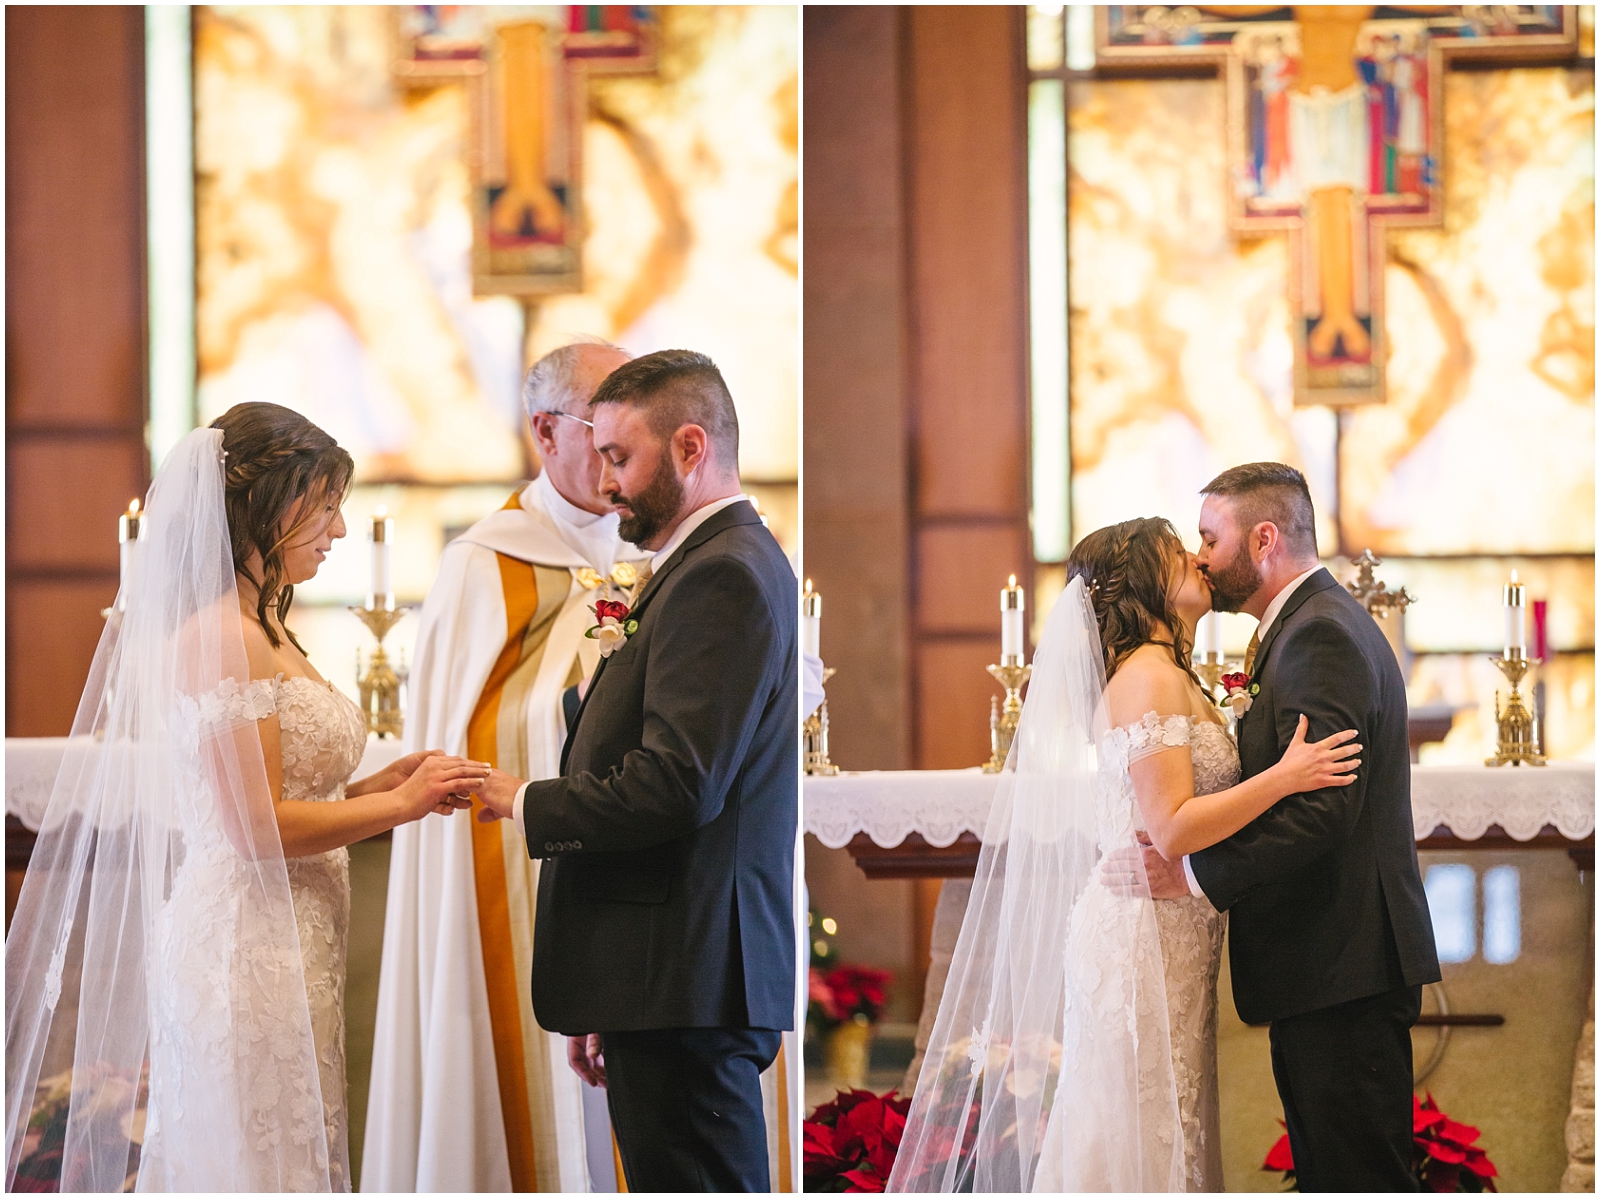 Bride and groom's first kiss at St Francis of Assisi Catholic Church wedding ceremony